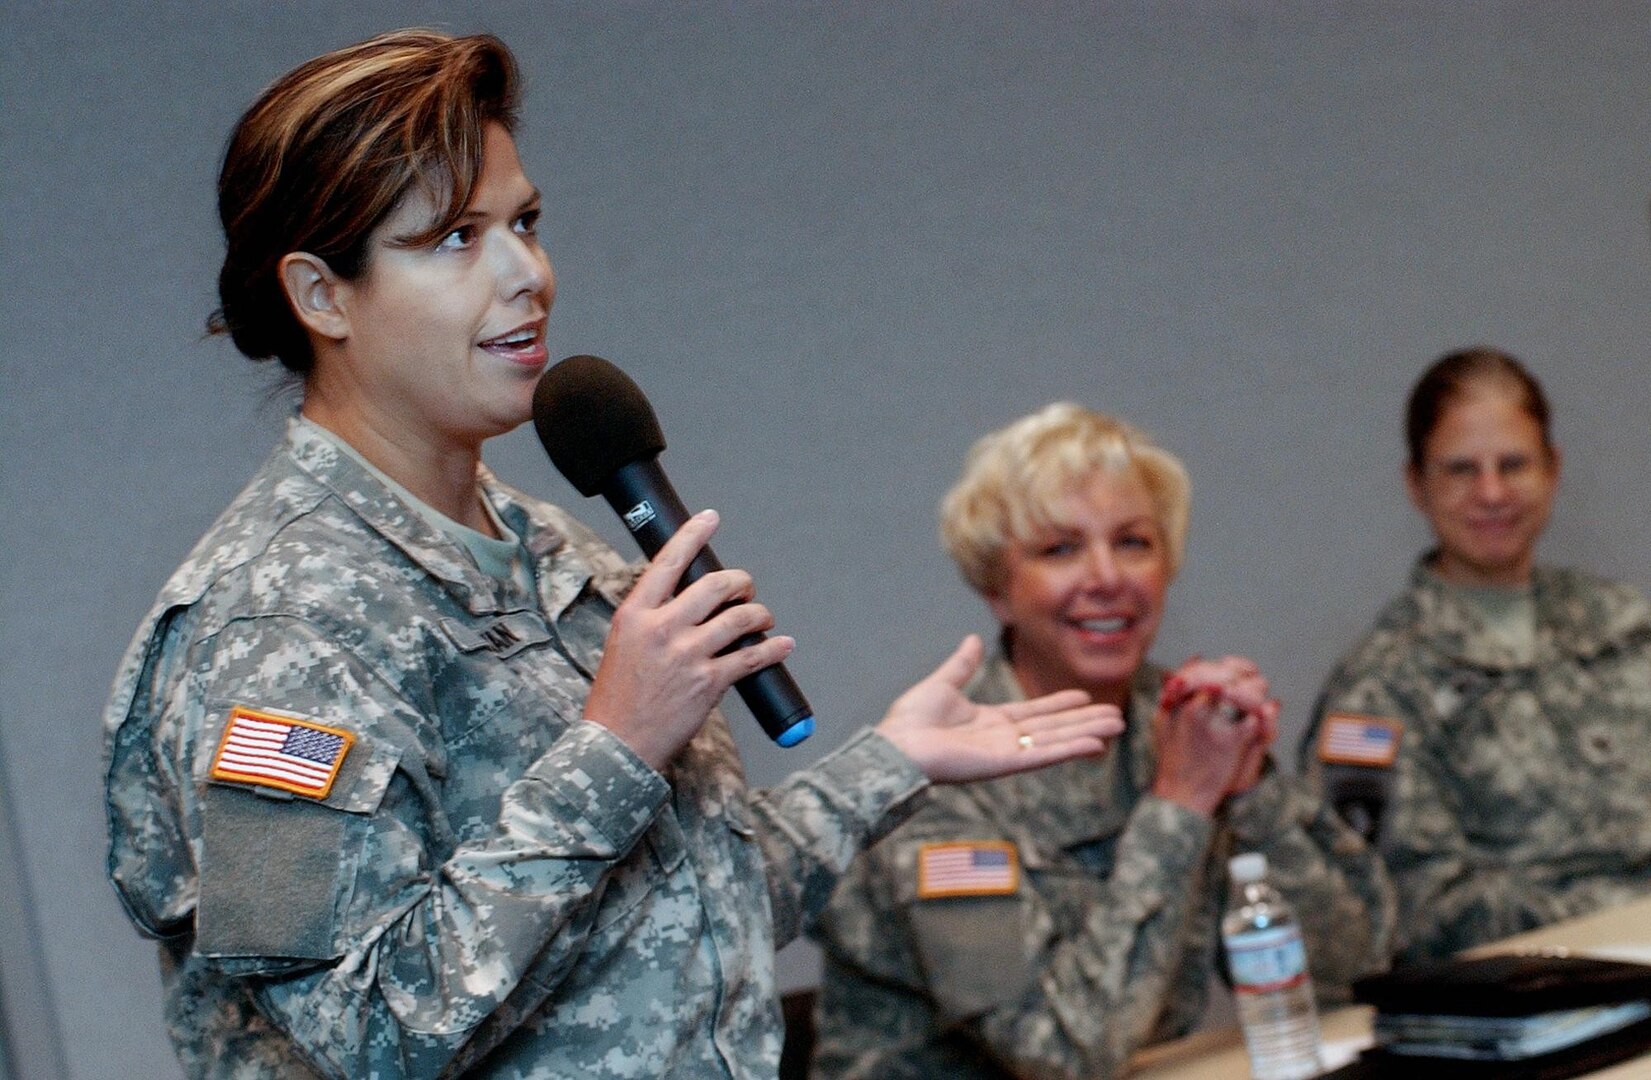 Chief Warrant Officer Lisa Bryan shares her experiences in the military during a Women Warrior Mentorship program at the Army National Guard Readiness Center in Arlington, Va., Monday, Nov. 17, 2008. The event was part of the Army's celebration of women in the Army as well as marking the 30th anniversary of the full integration of women into the Army.